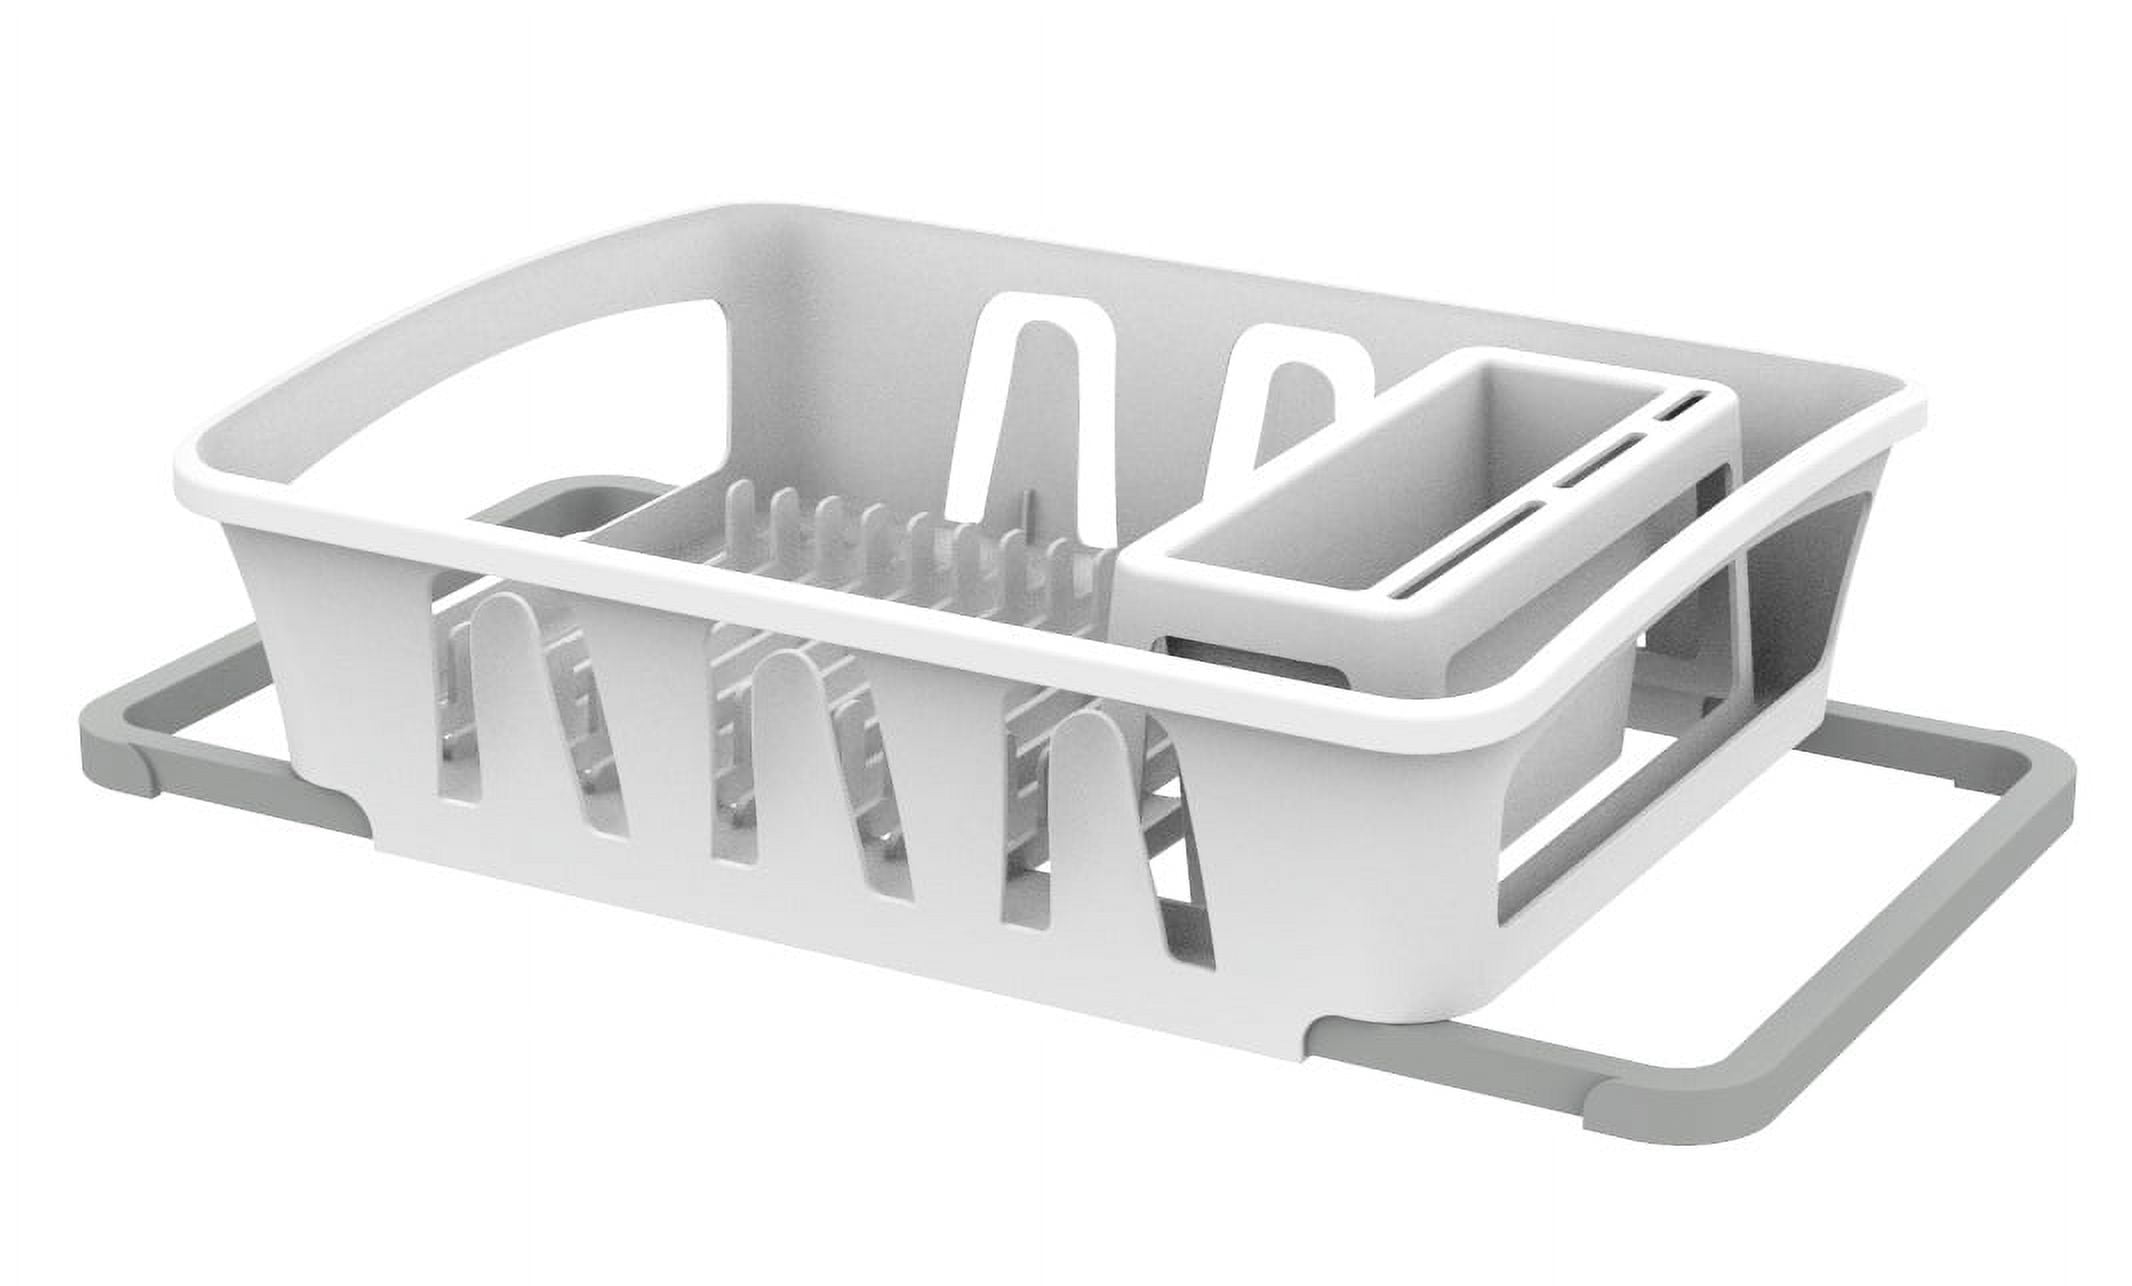 PETXPERT Dish Drying Rack, Expandable Dish Rack for Kitchen Counter with  Utensil Holder, Stainless Steel Small Dish Drainer Organizer with  Drainboard